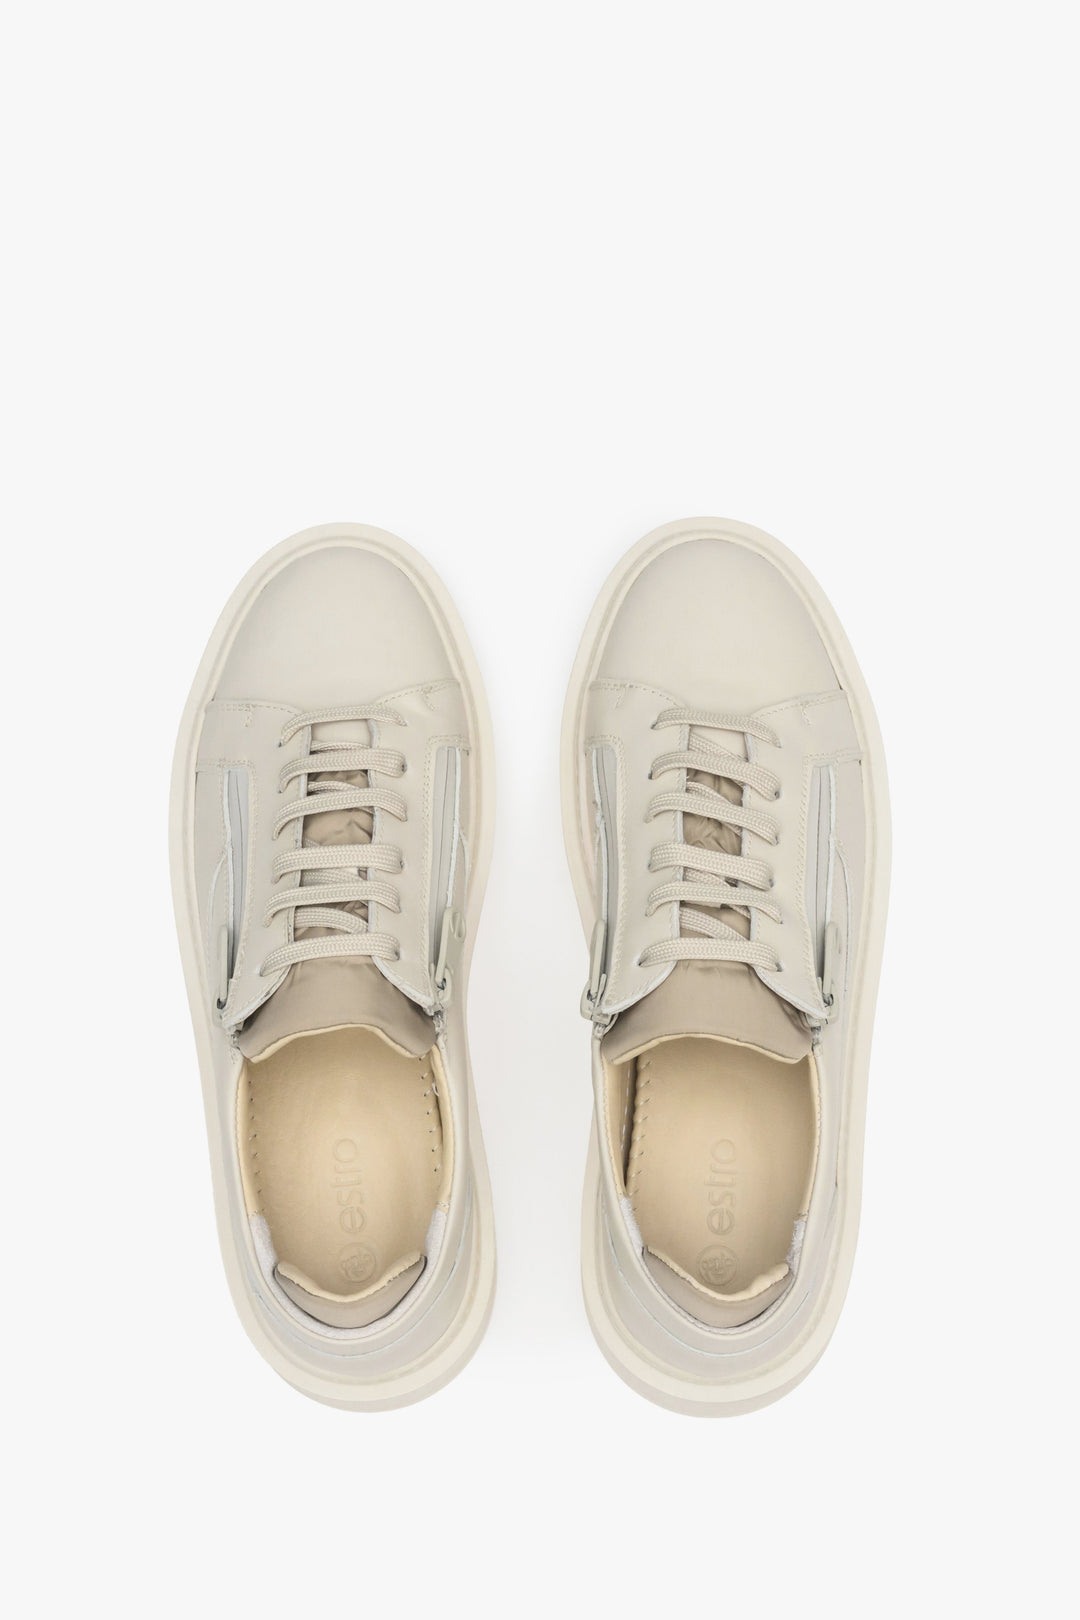 Women's leather spring sneakers by Estro with laces - top view presentation of the footwear.